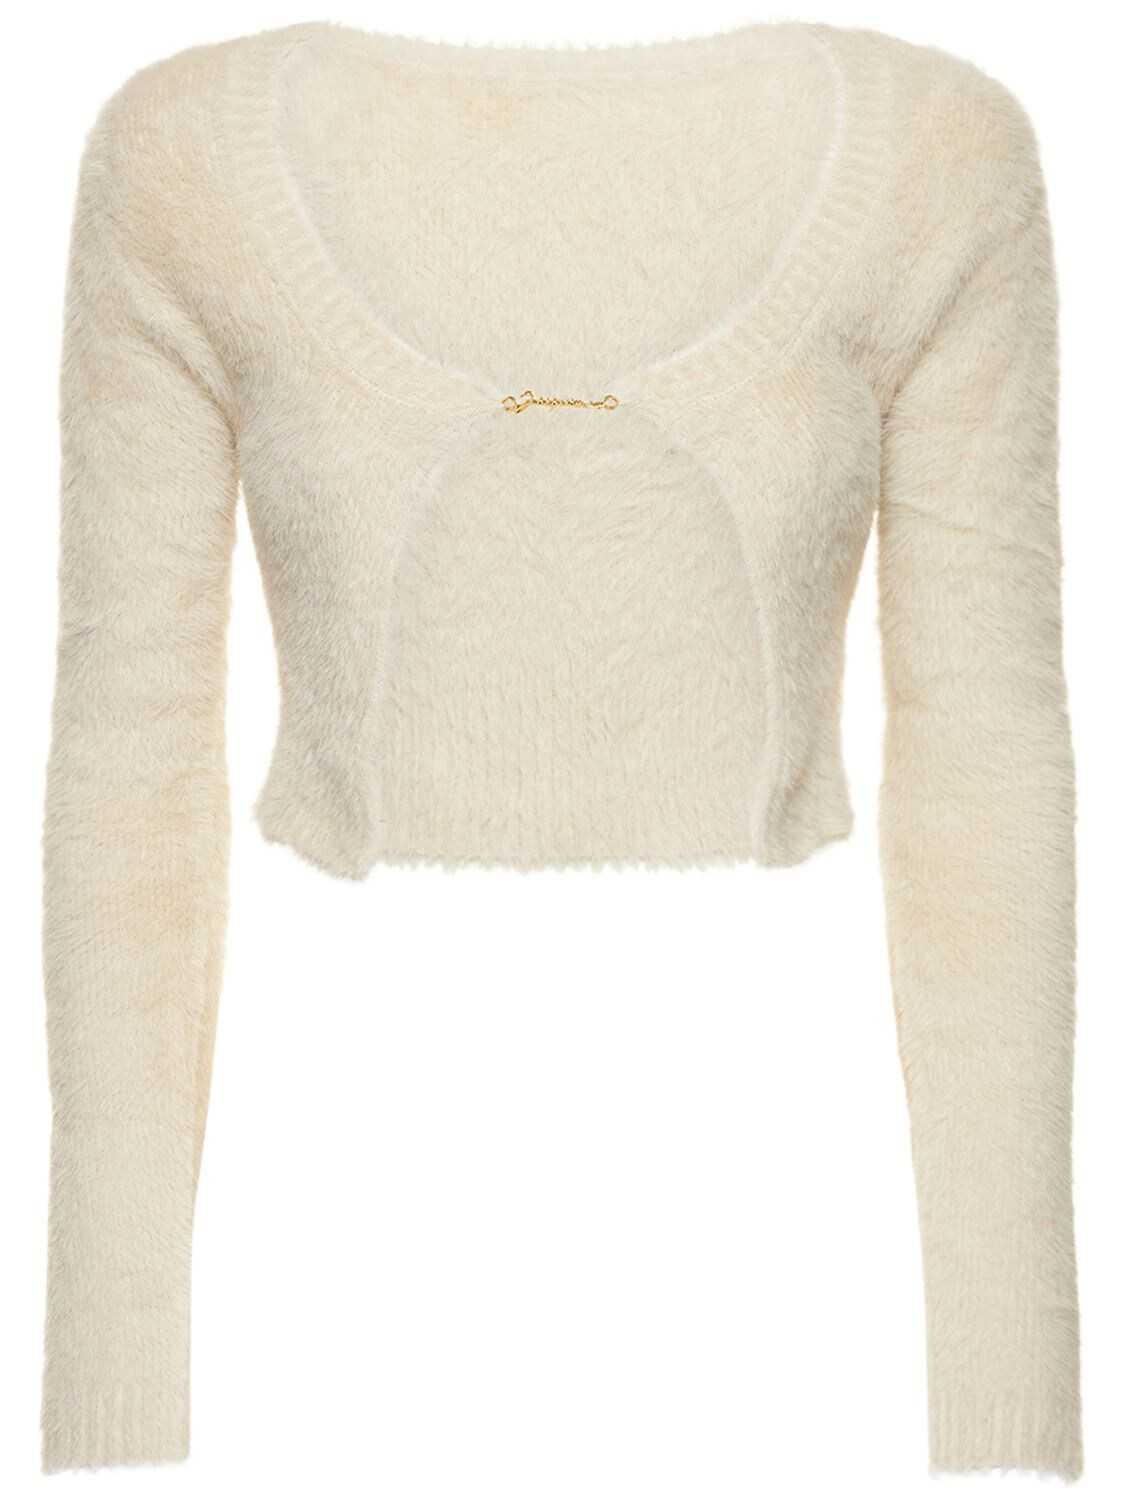 La Maille Neve Manches Fluffy Top